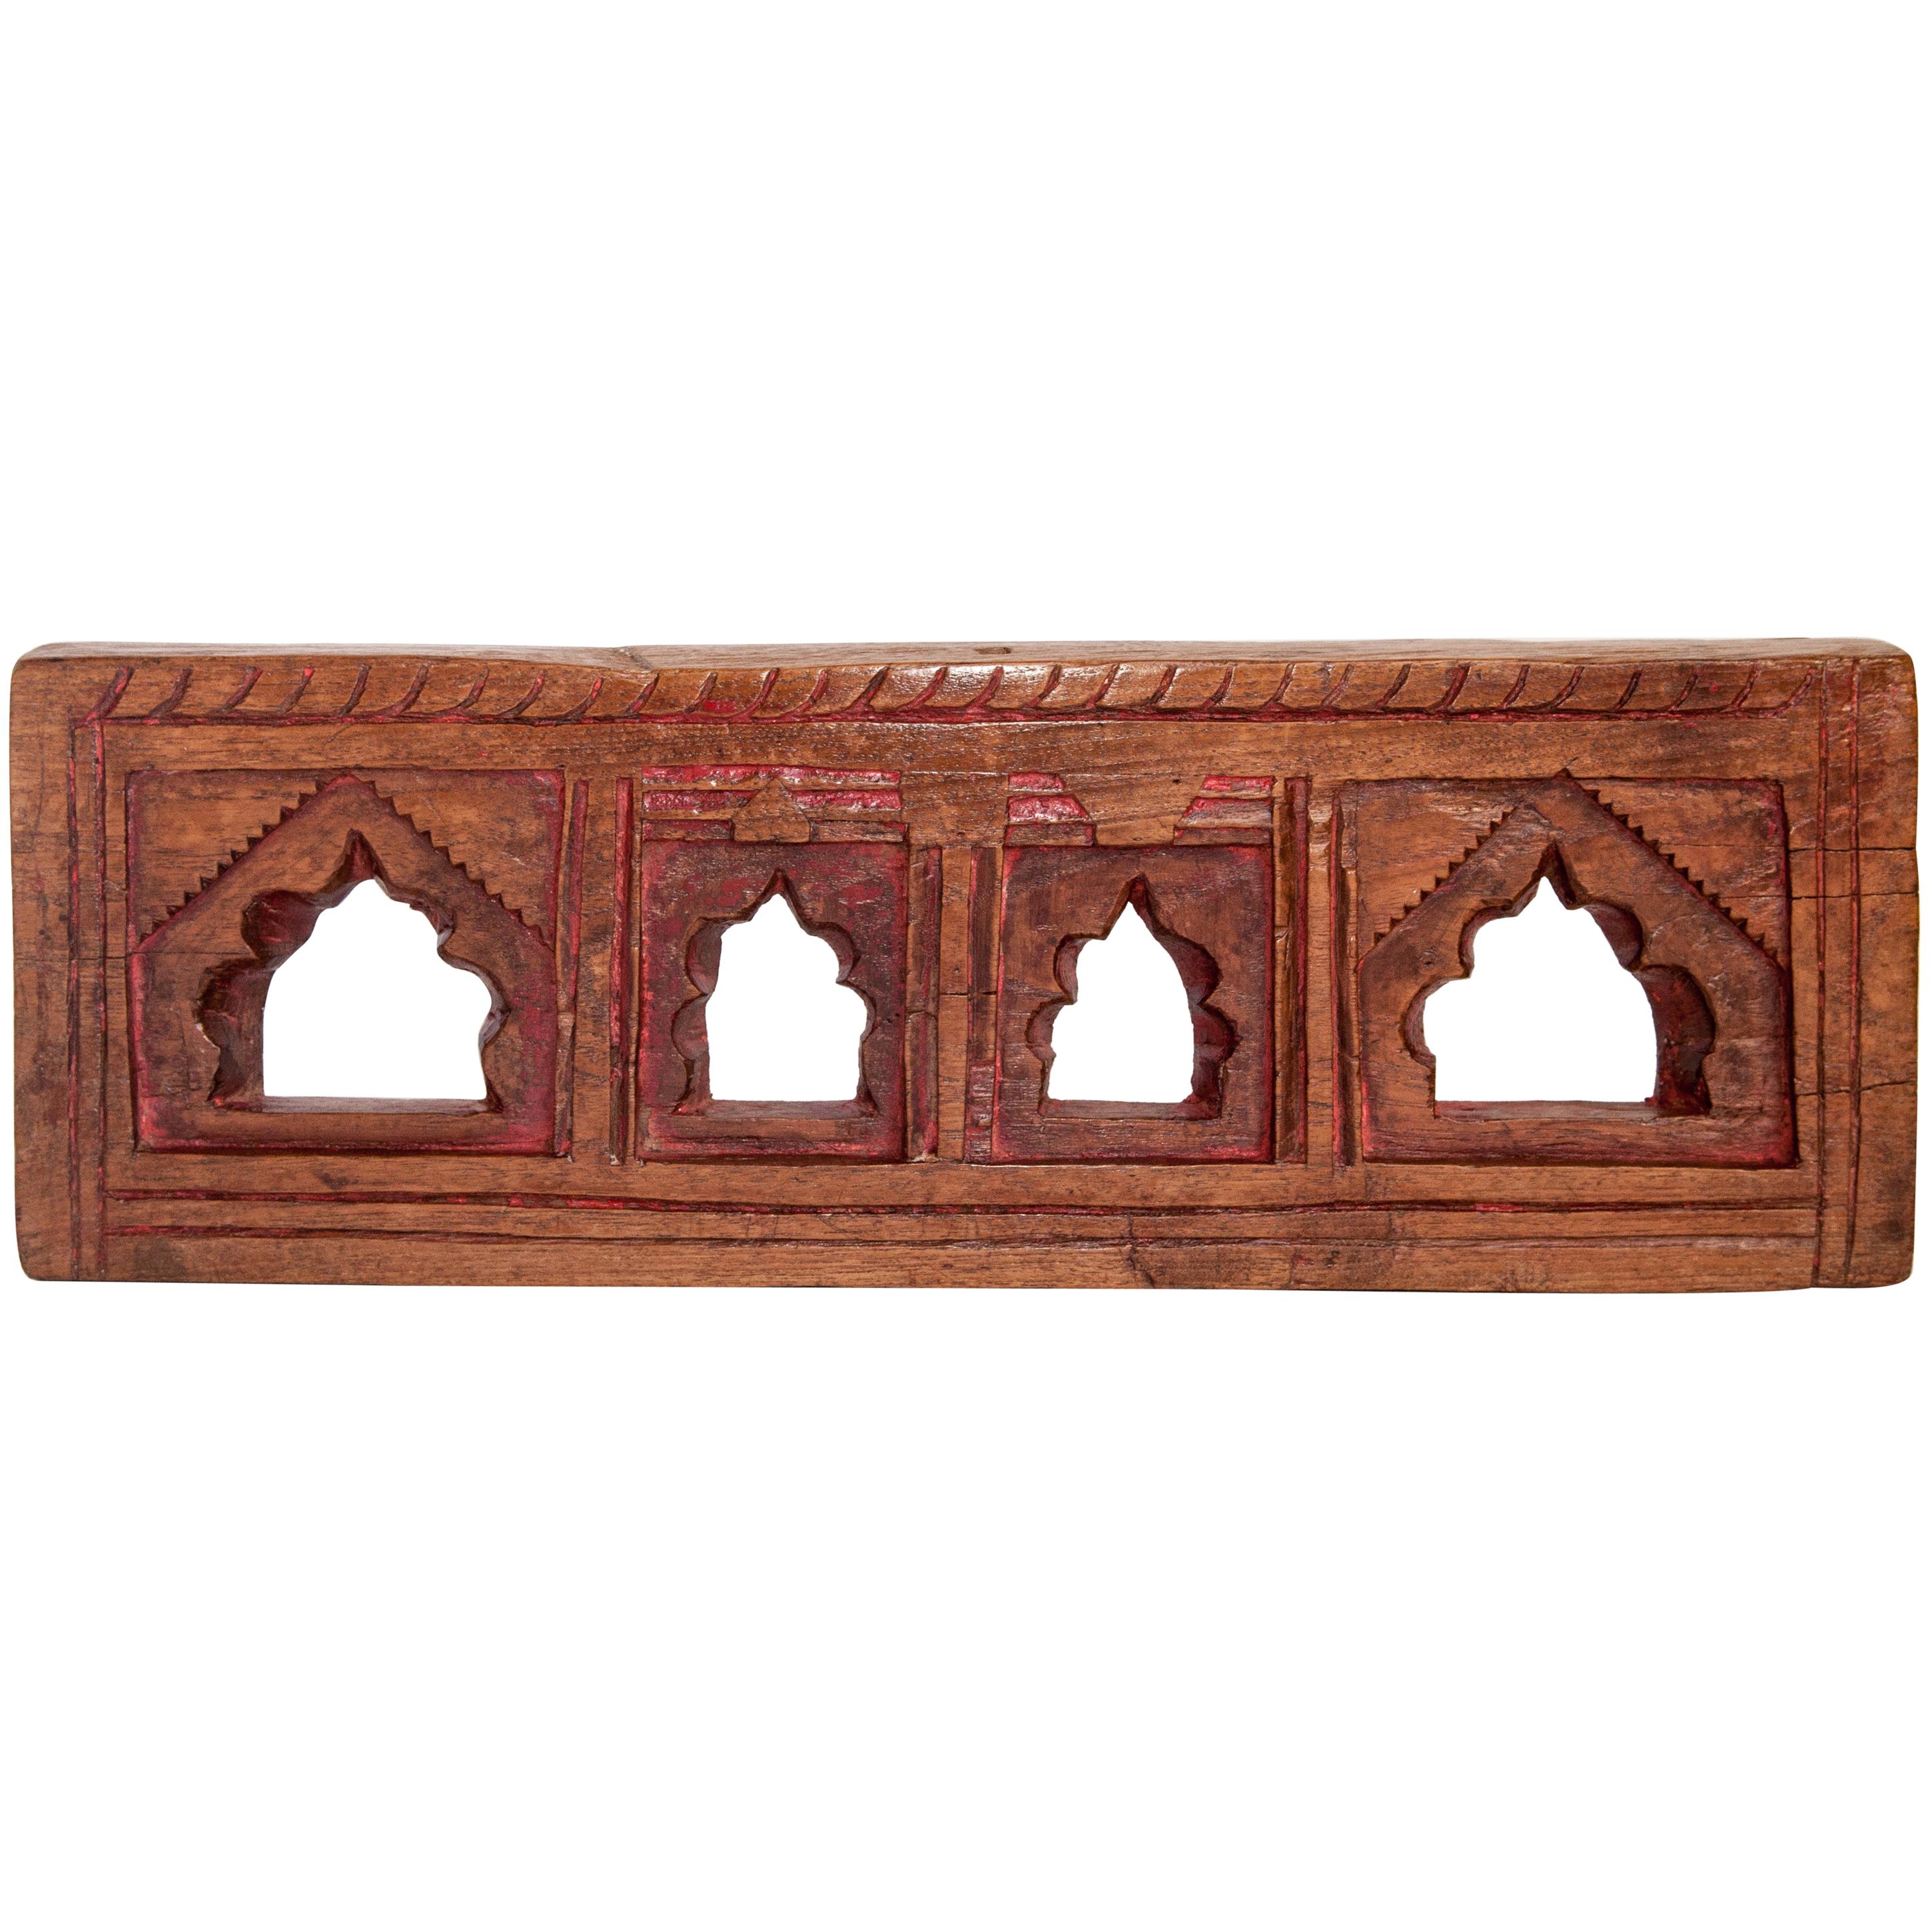 Vintage Carved Wooden Picture Frame, Mid-20th Century, India